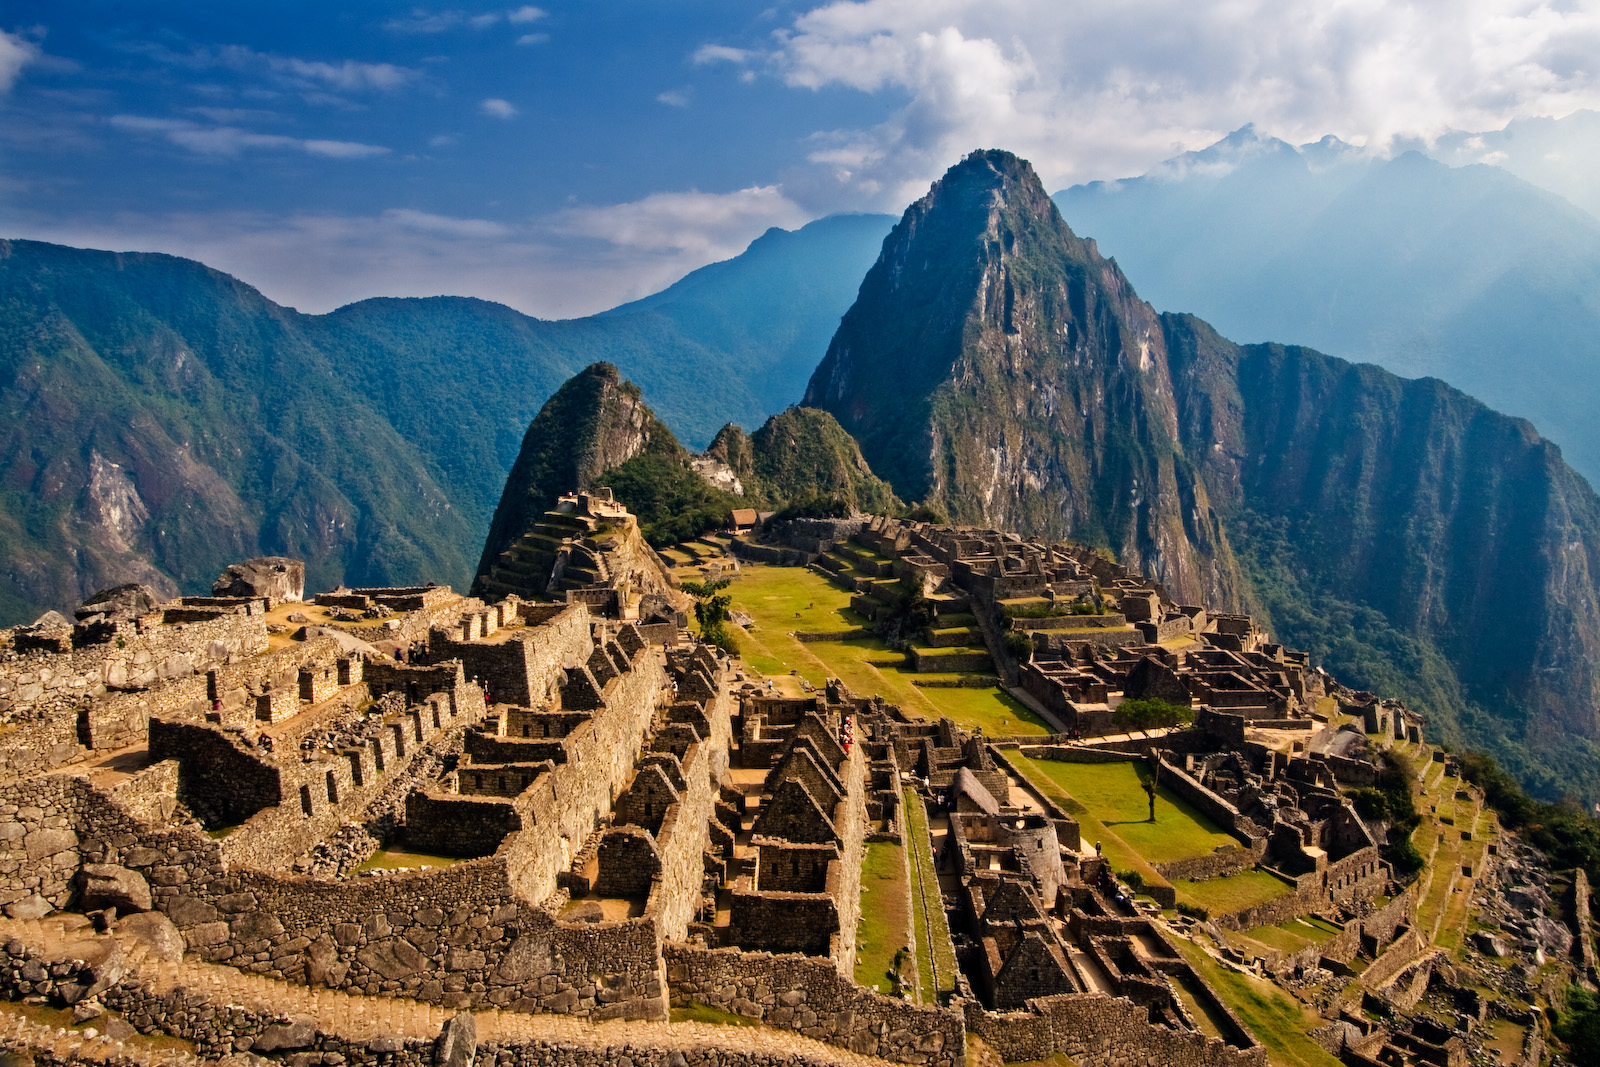 What to do to avoid the Altitude Sickness at Machu Picchu